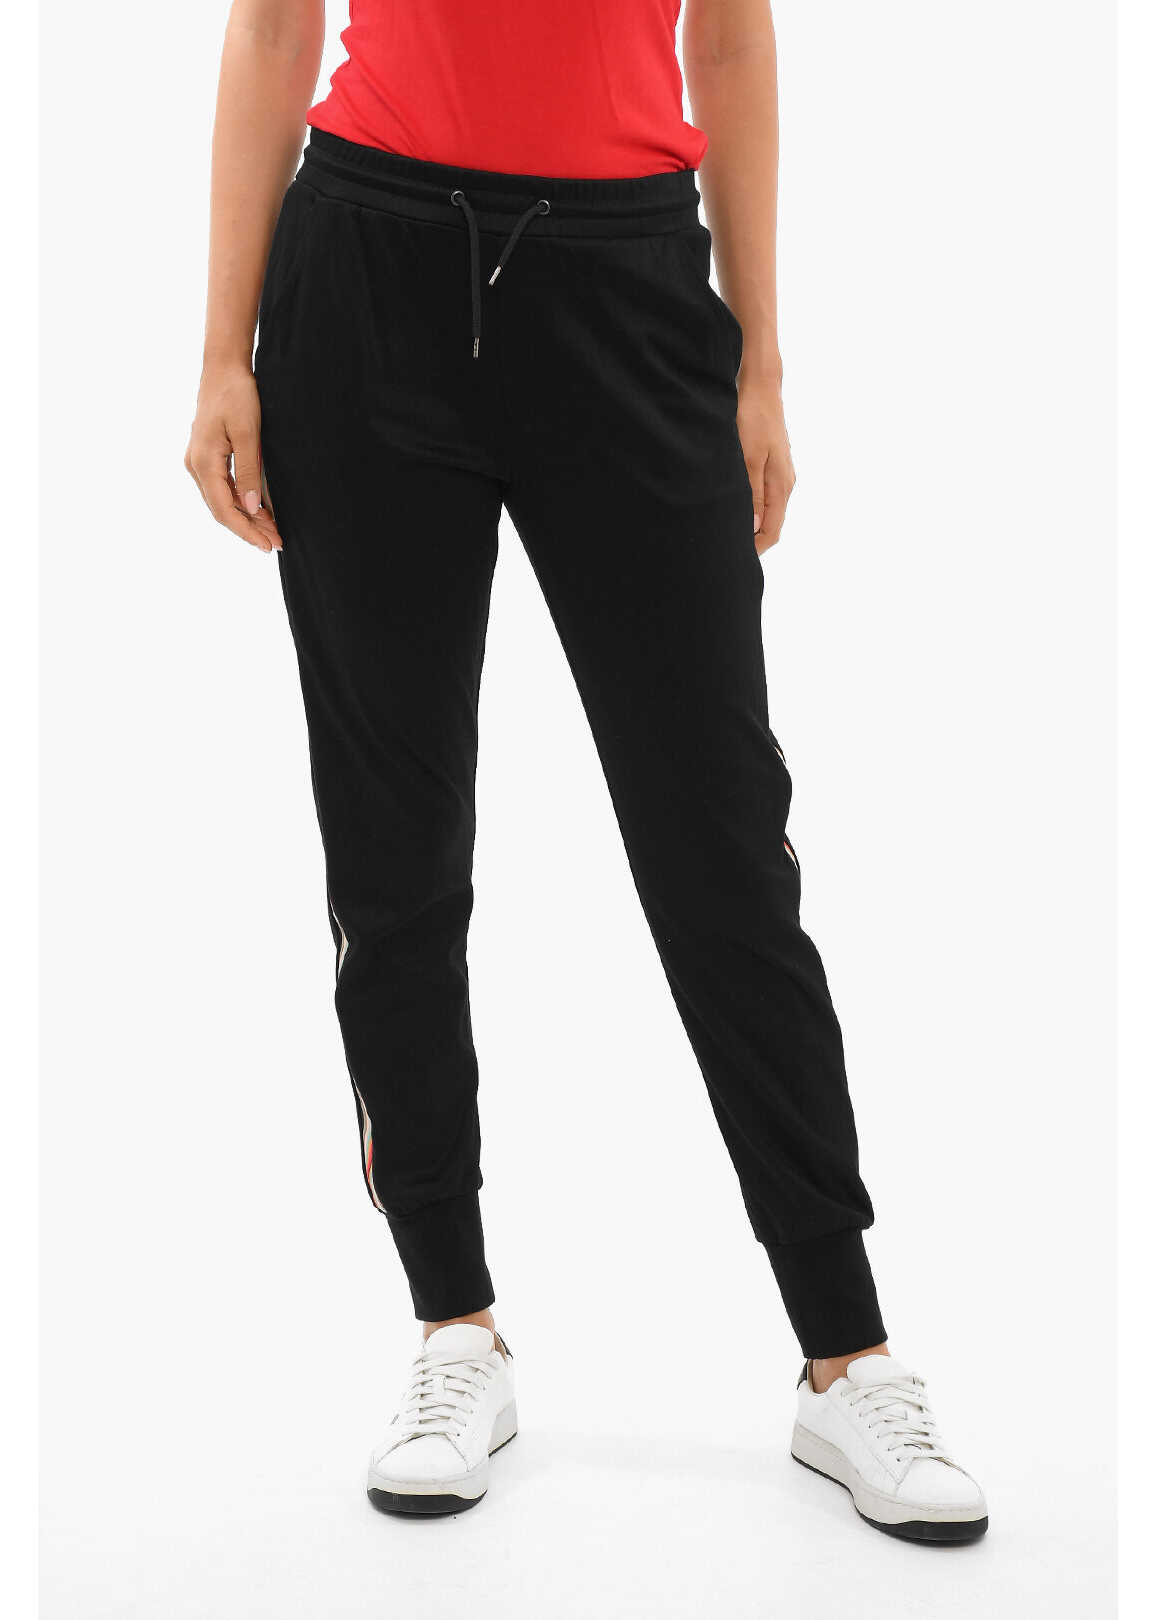 Paul Smith Contrastig Bands Joggers With Drawstrings Black